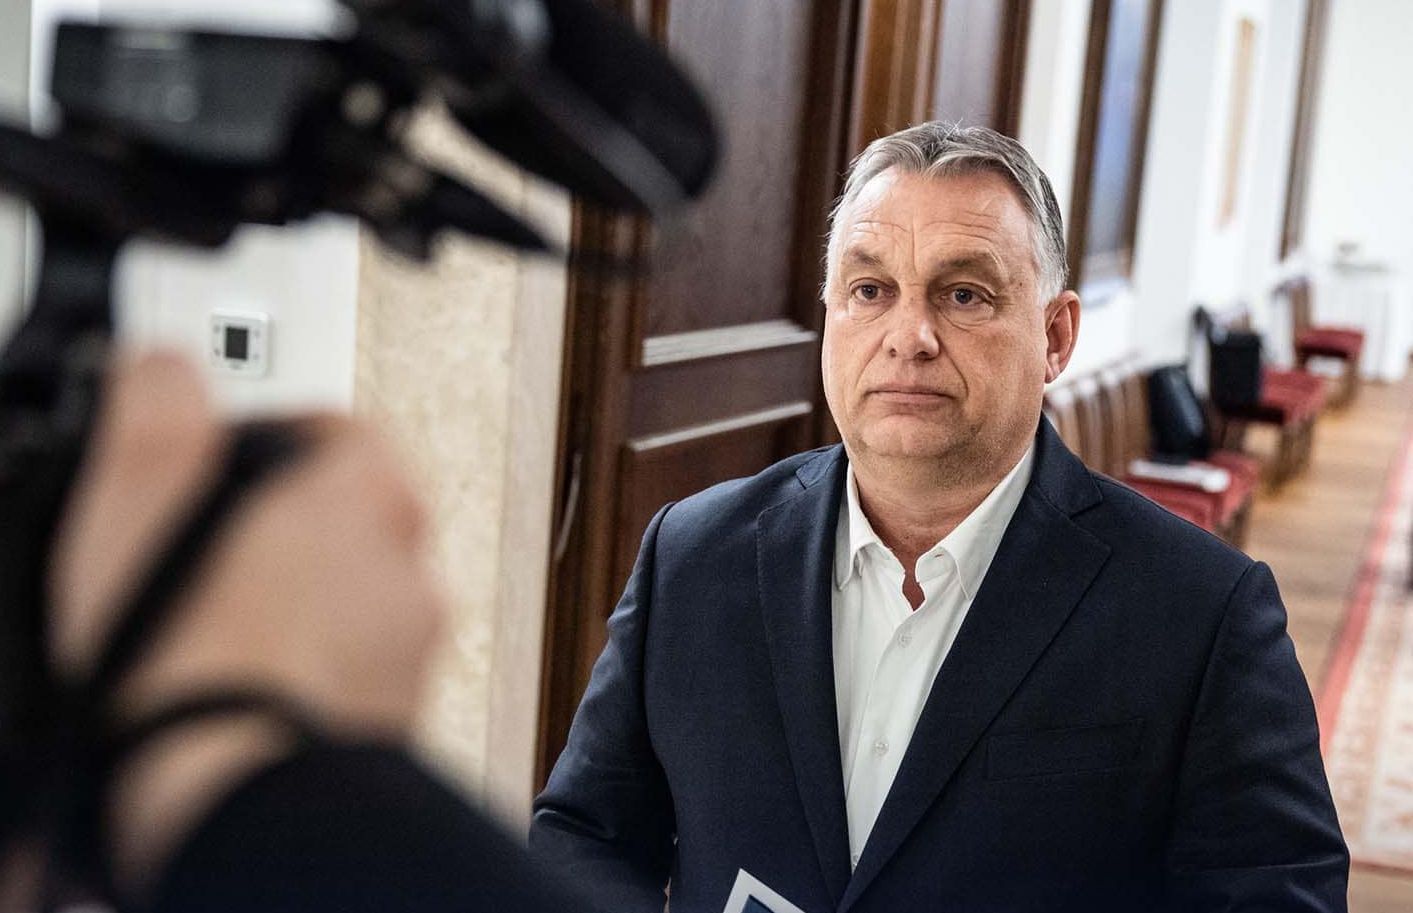 PM Orbán: Gov't to Cap Food Prices